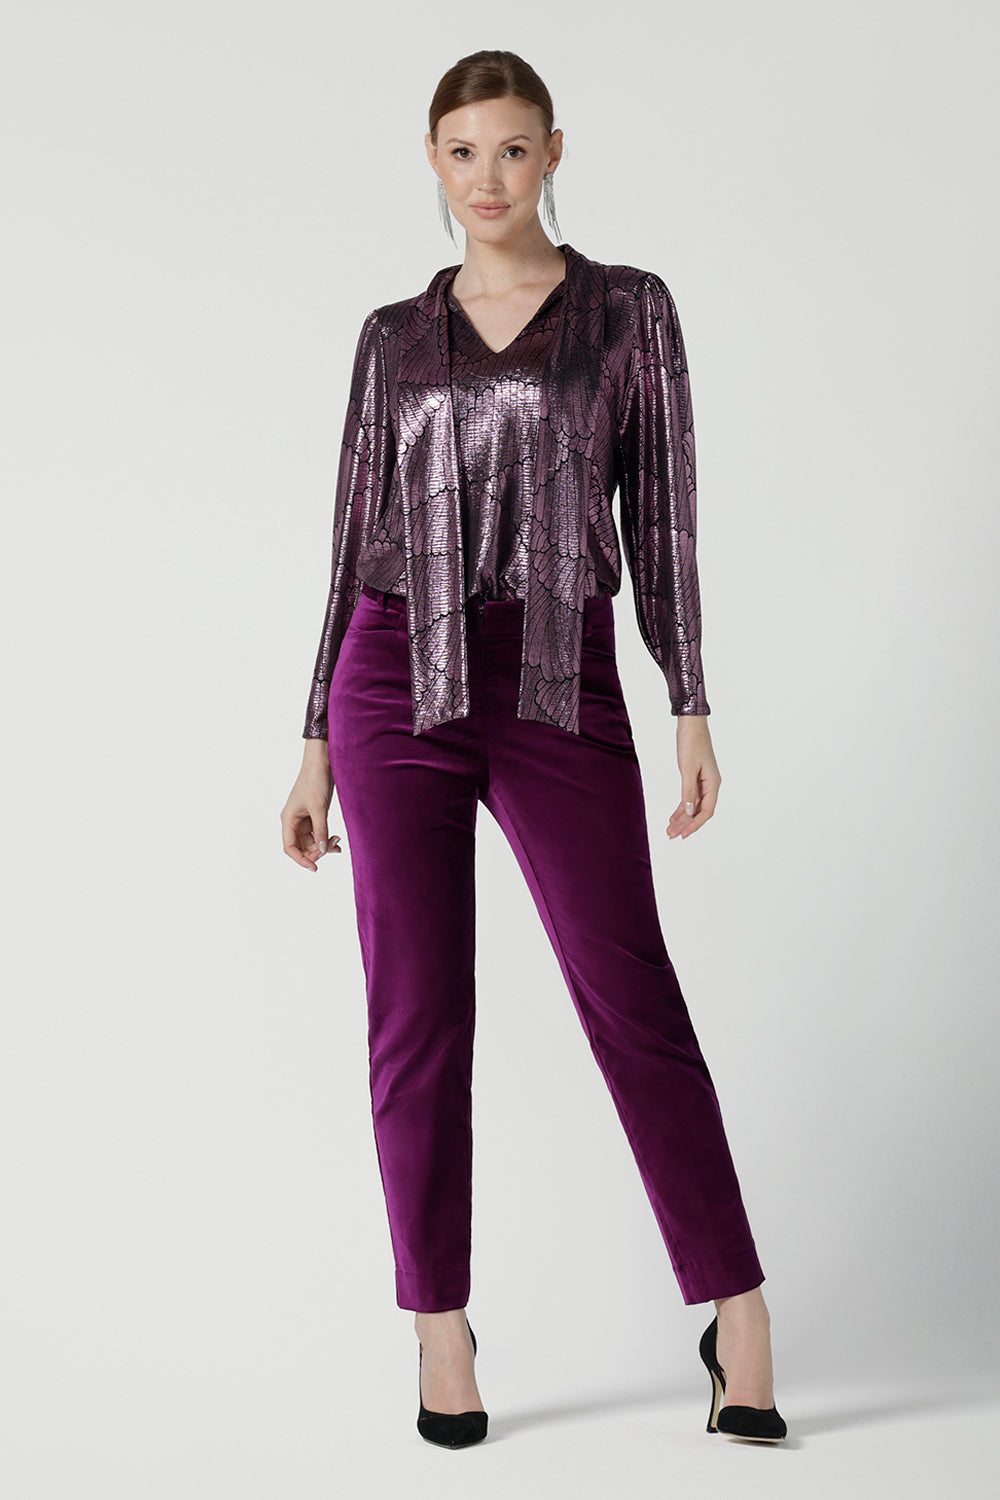 A size 10 woman wears the Keaton Pant in Magenta velveteen. Stylish up late evening wear. Size 10 up late. 